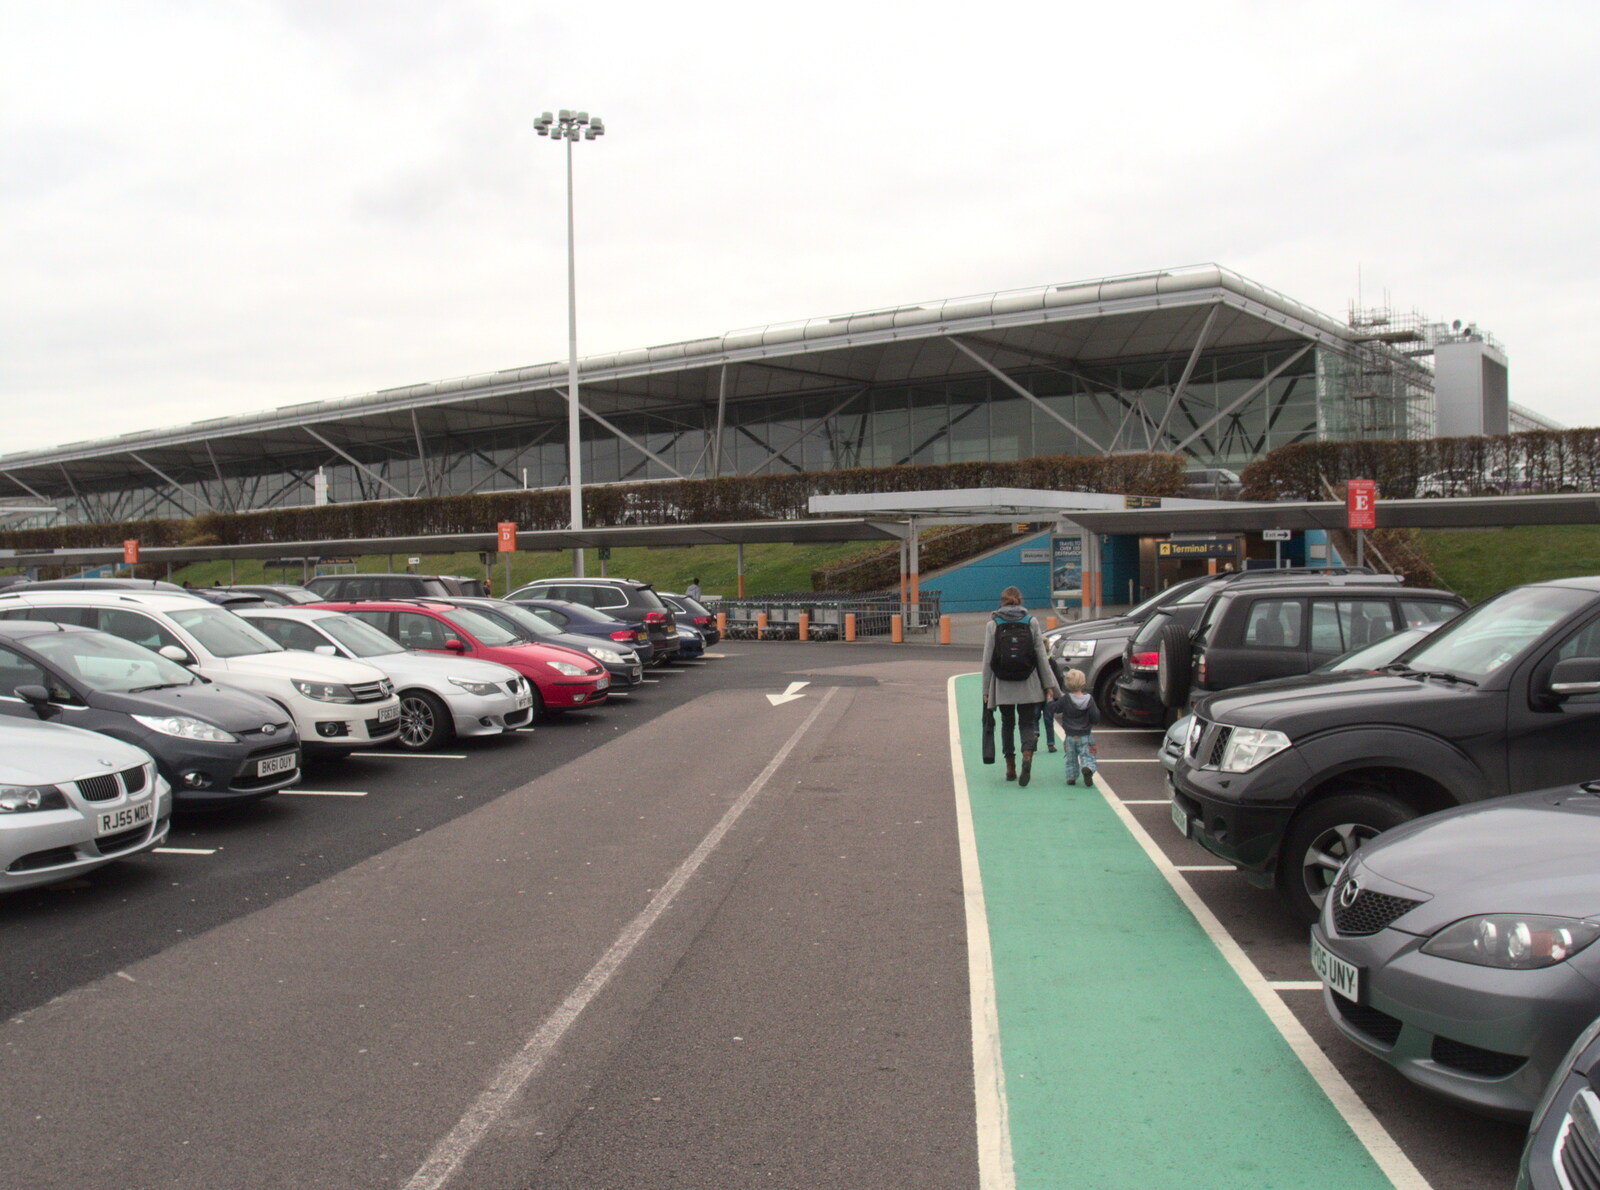 The short-stay car park at Stansted from A Bomb Scare and Fred Does Building, London and Suffolk - 30th October 2014